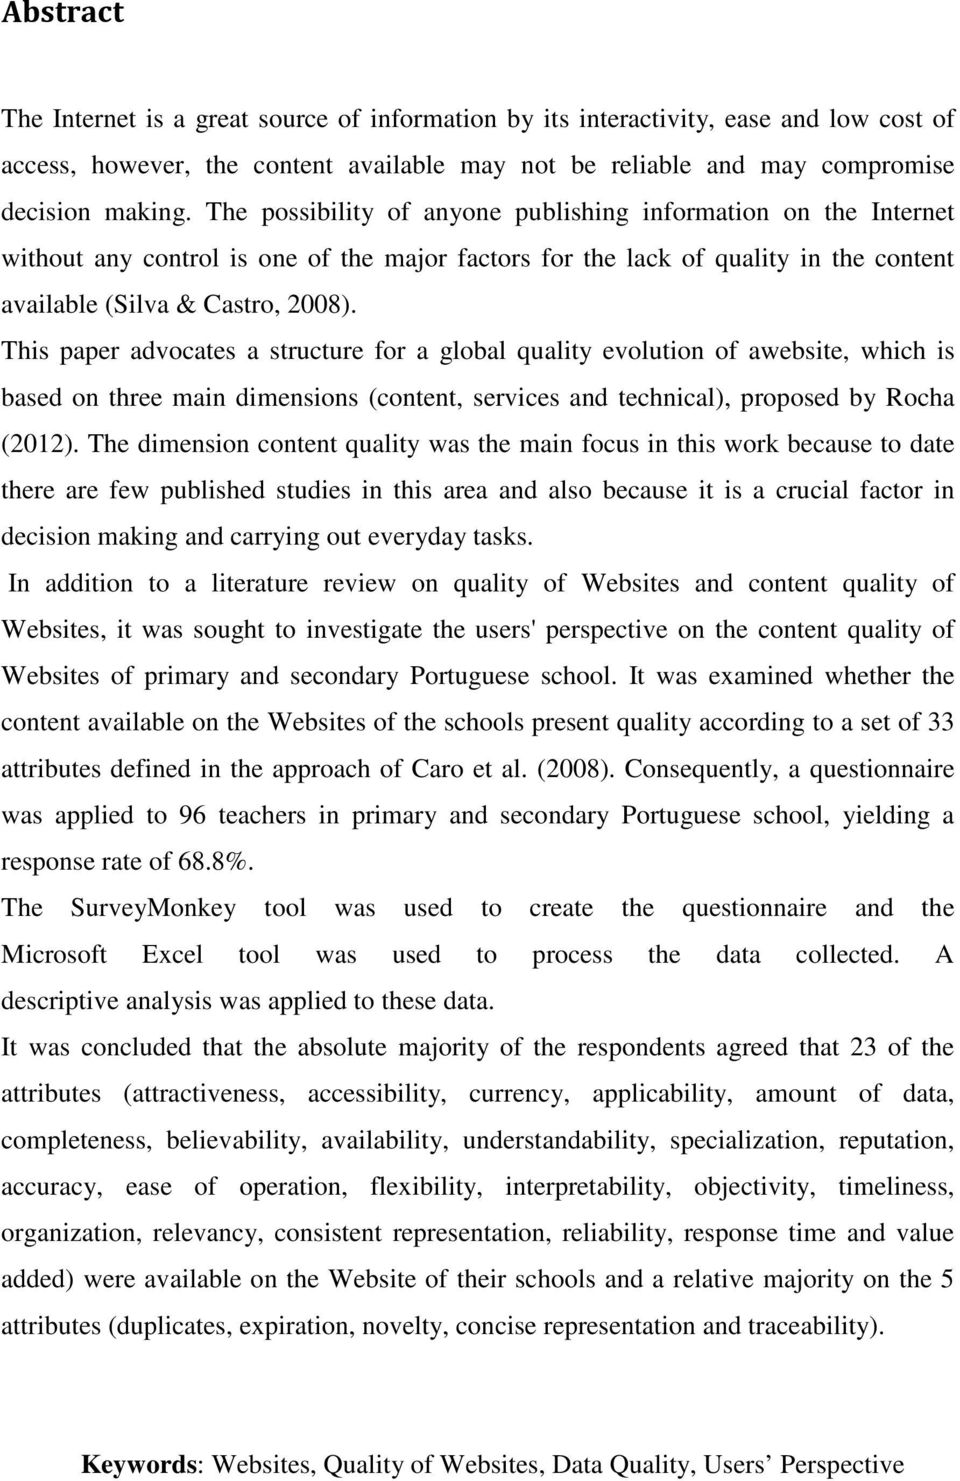 This paper advocates a structure for a global quality evolution of awebsite, which is based on three main dimensions (content, services and technical), proposed by Rocha (2012).